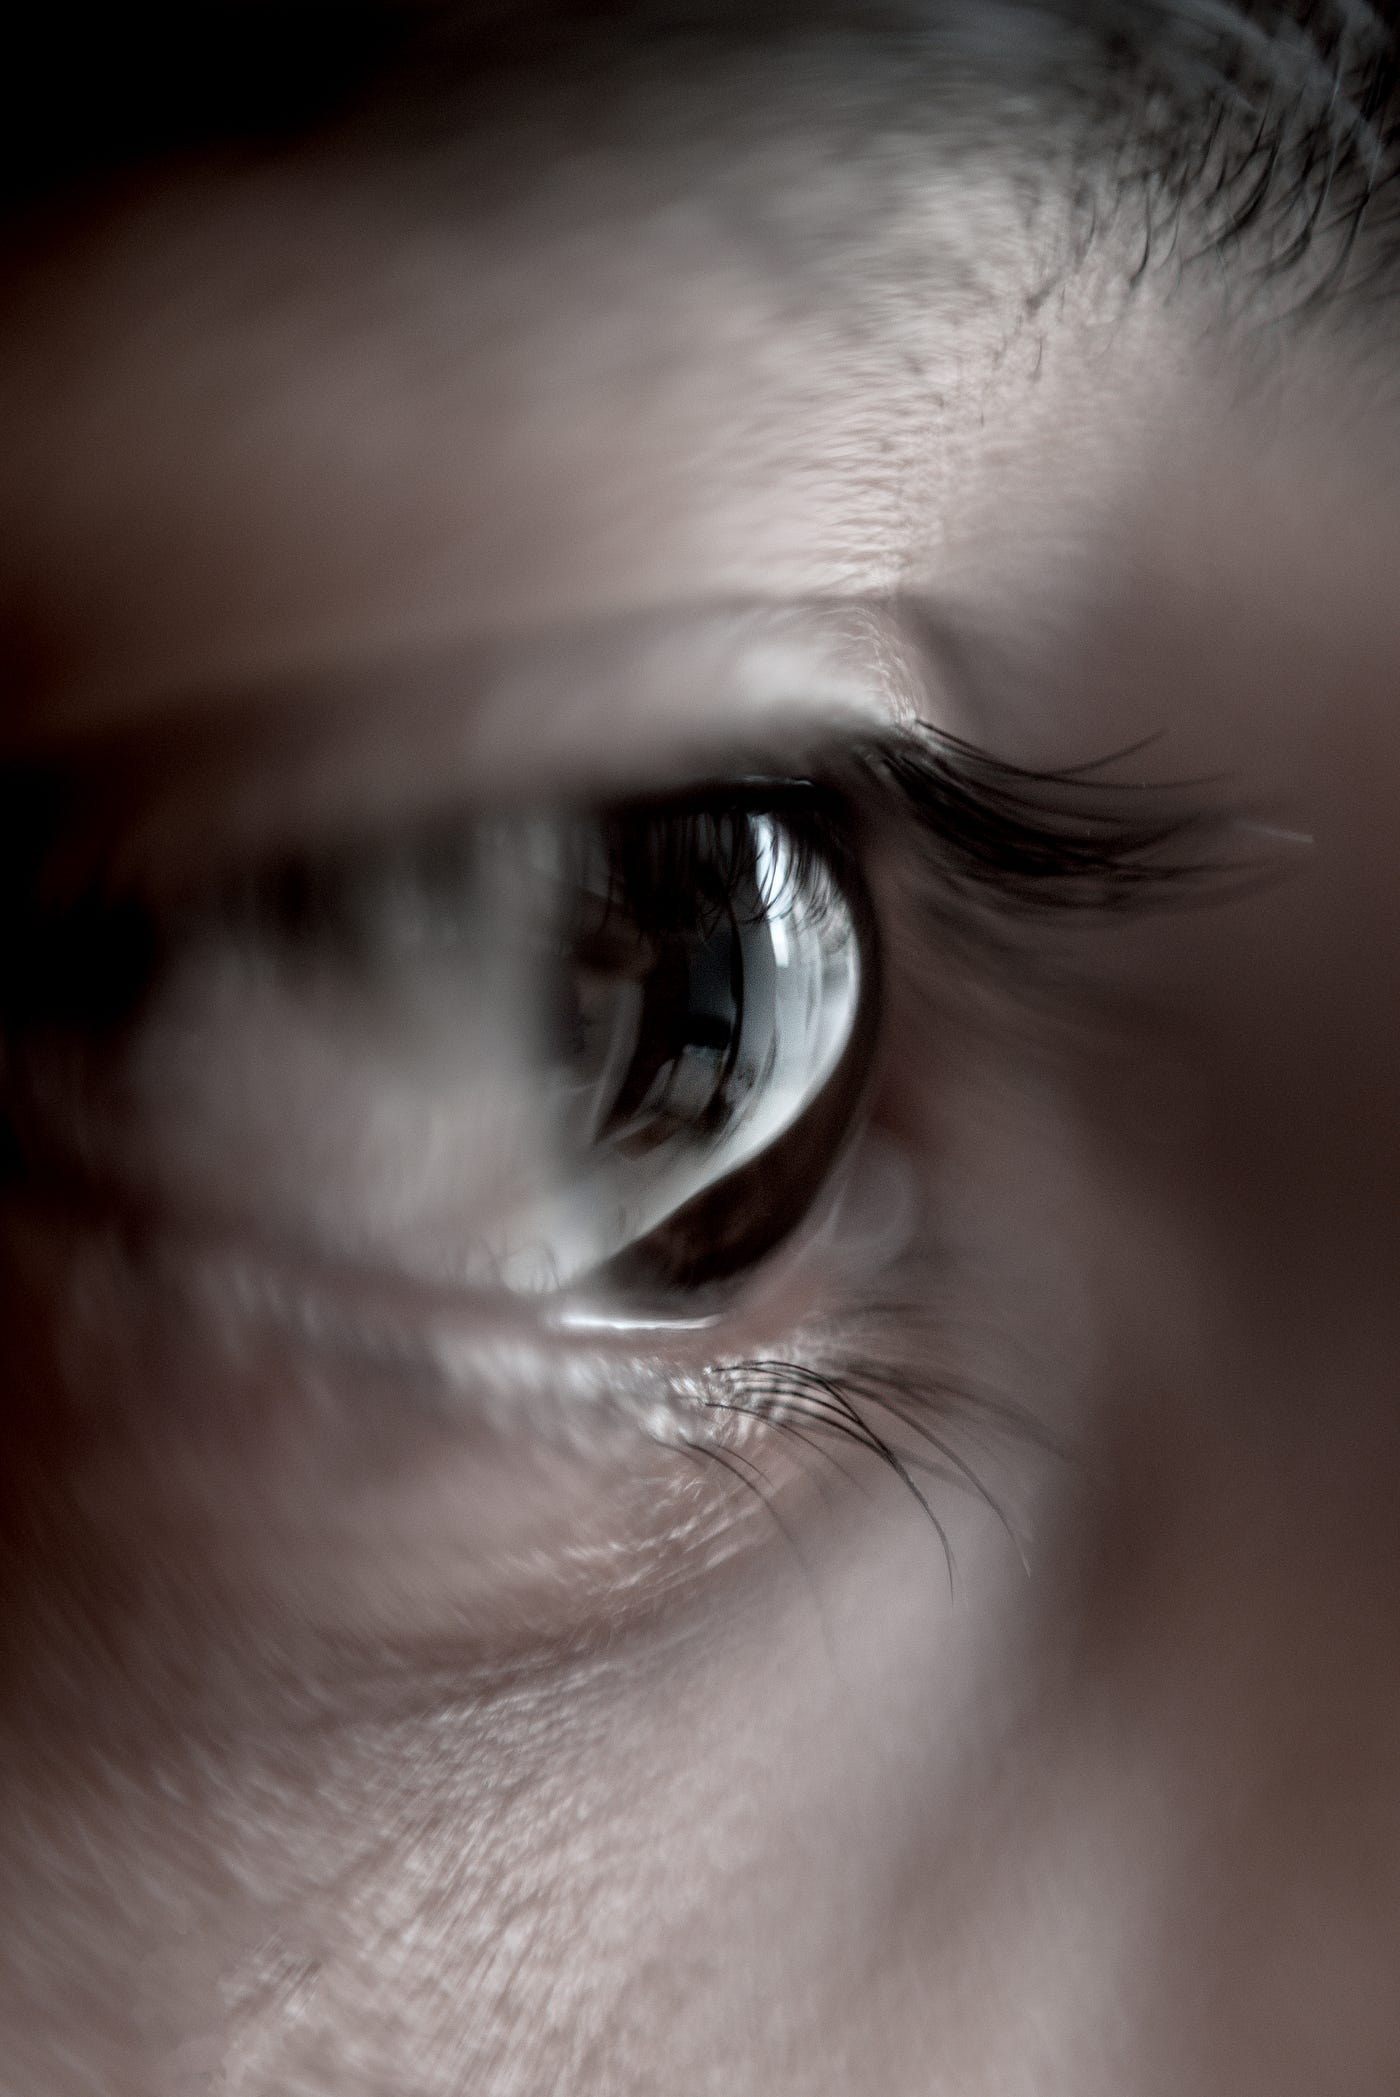 Close up on an eye, see from the side. The person has brown skin and brown eyes.